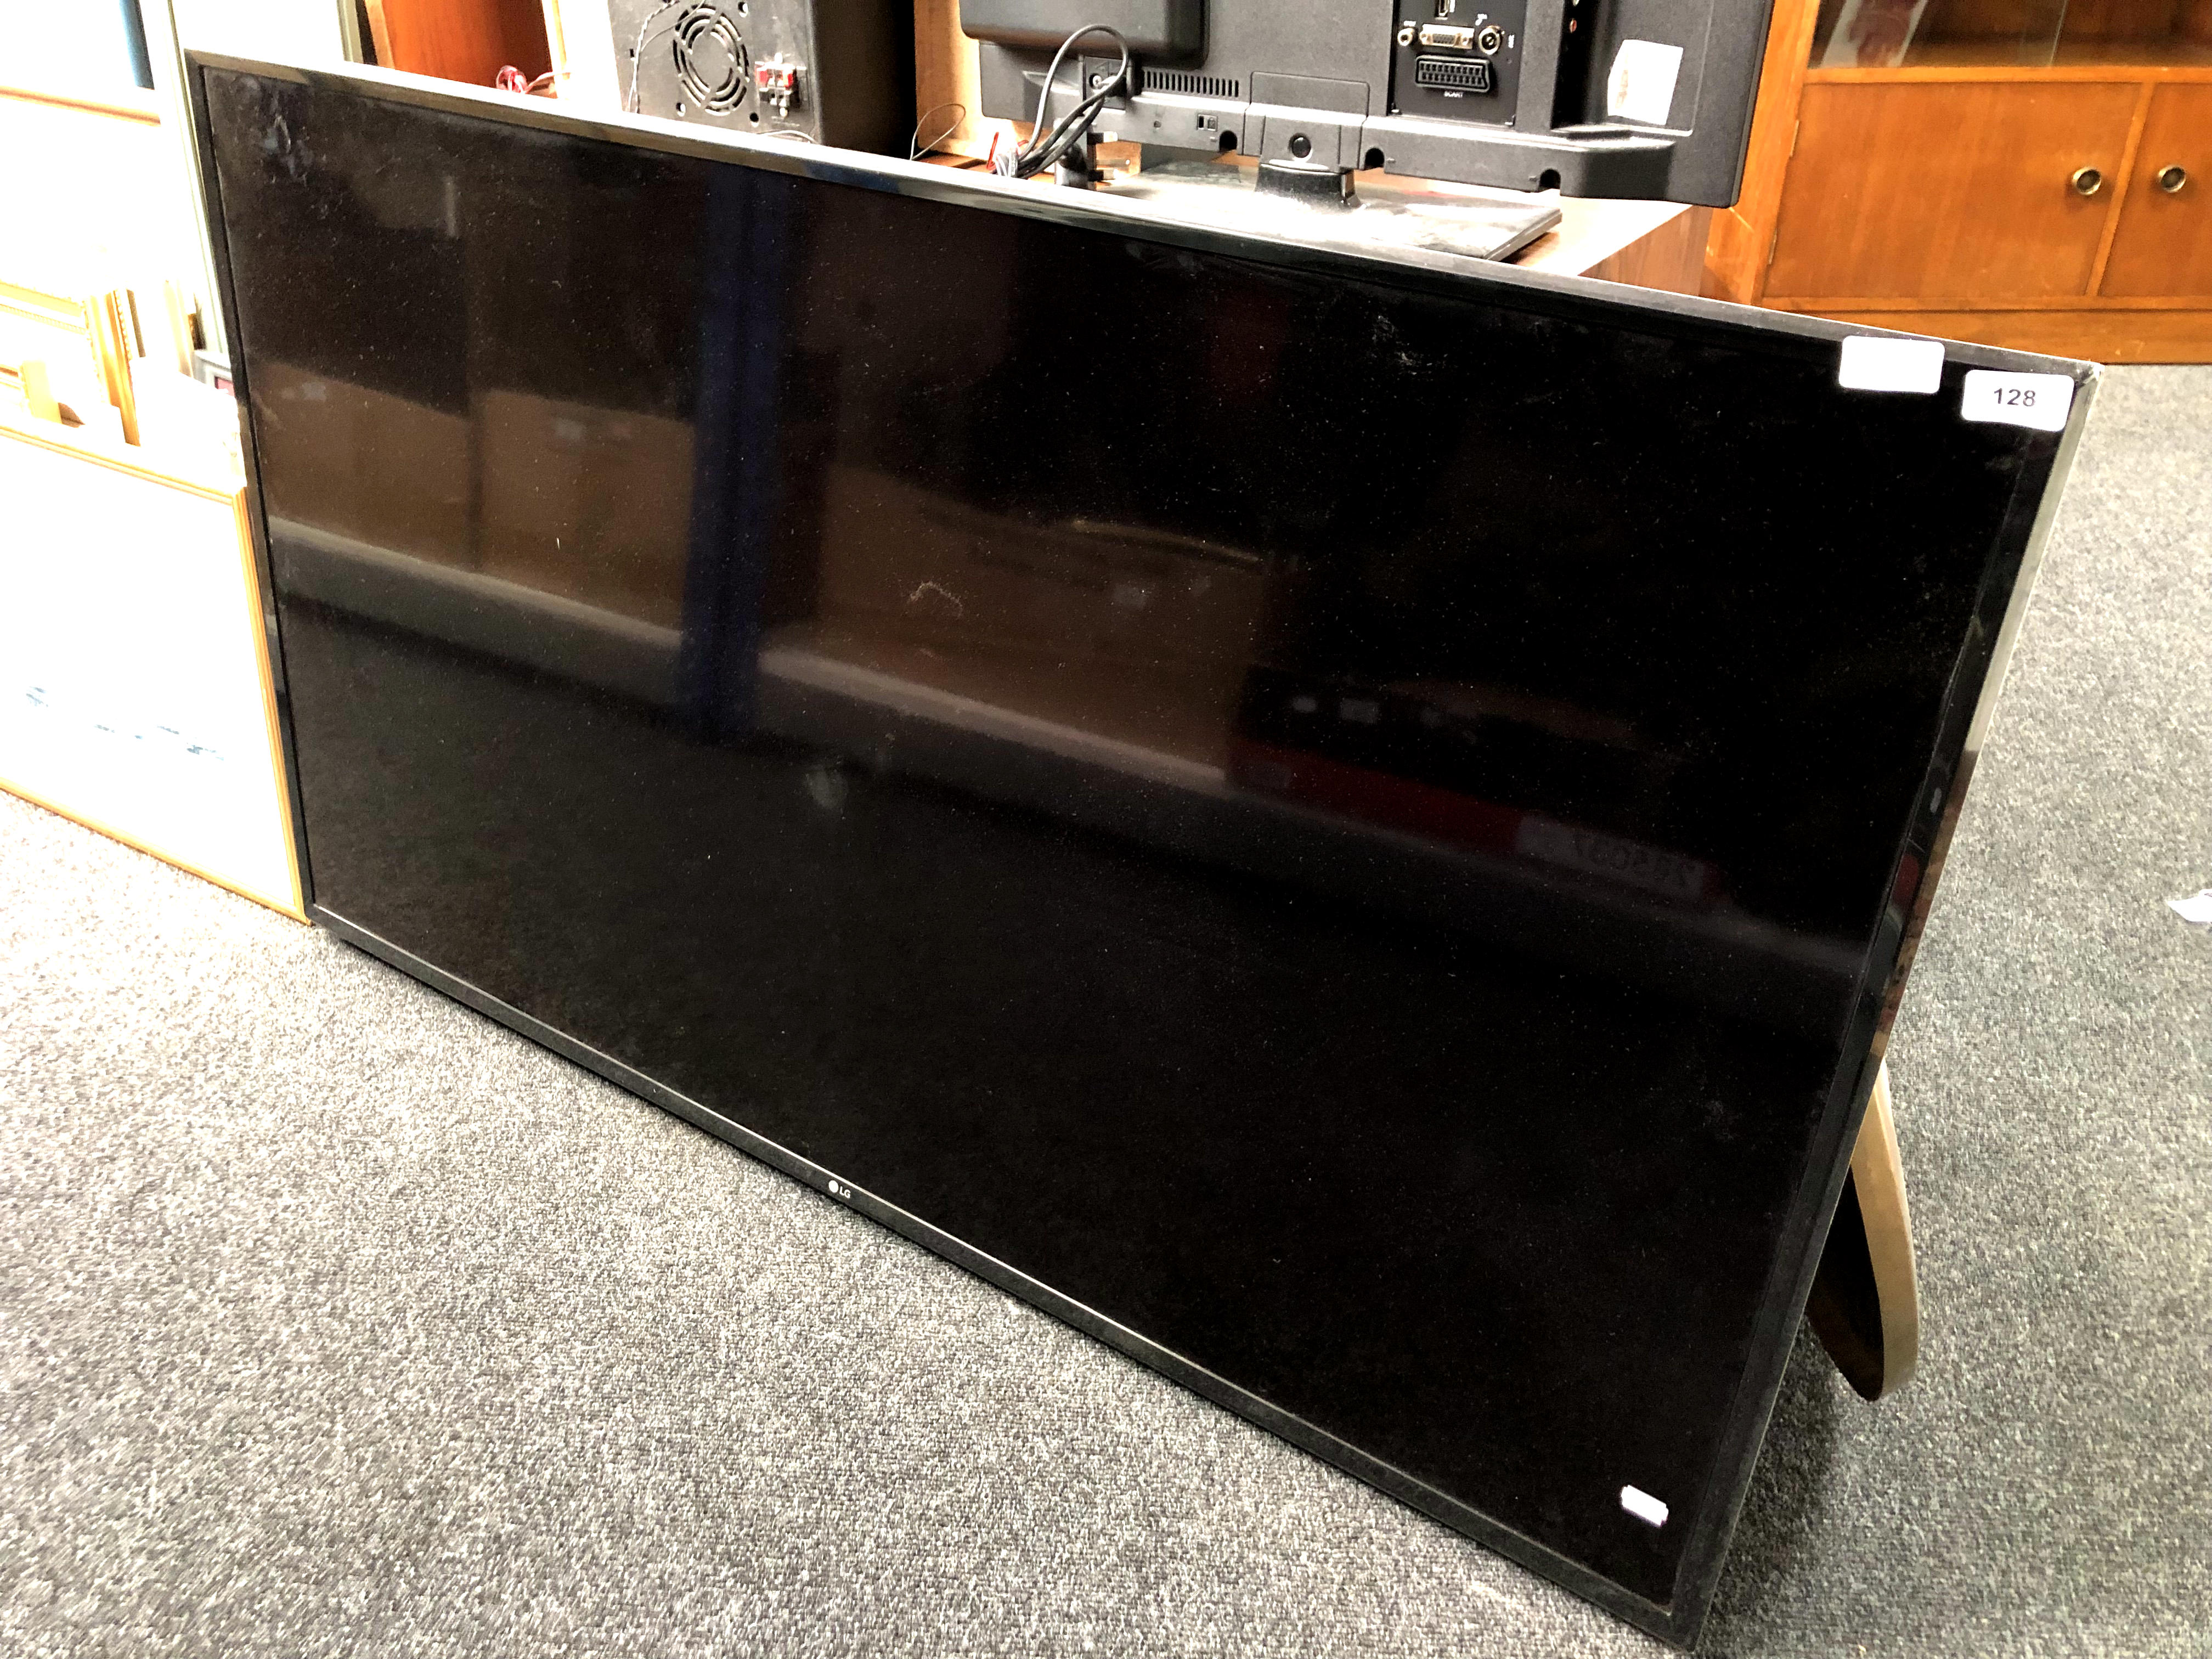 An LG 55'' LCD TV with universal remote